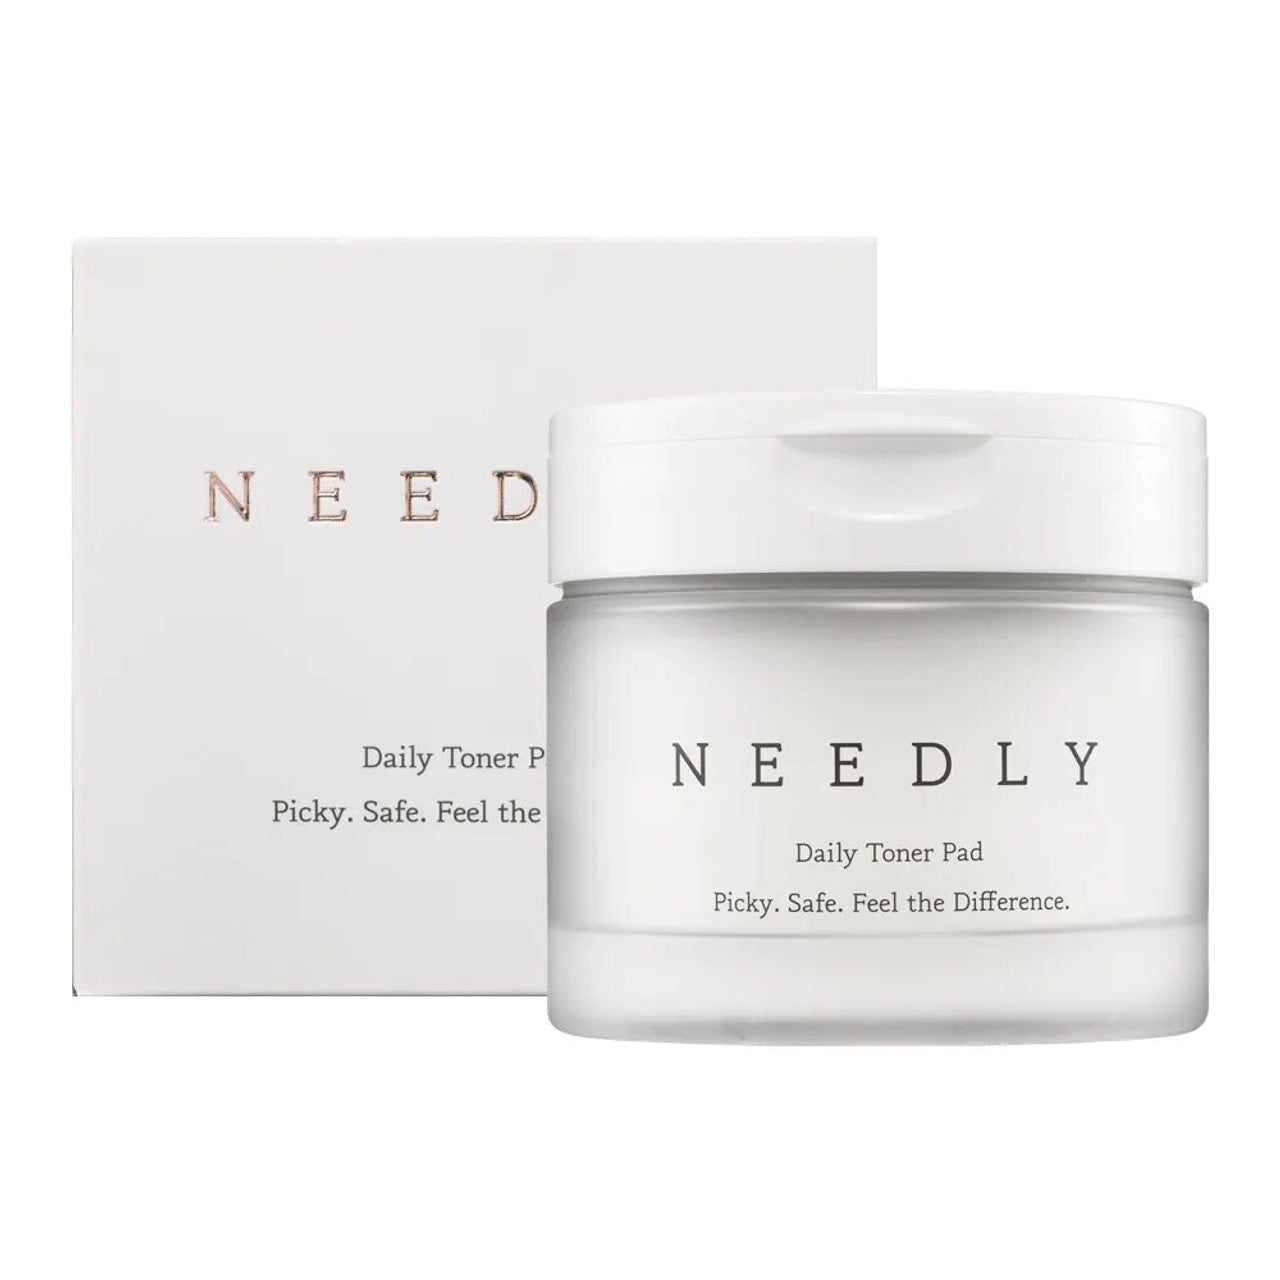 Needly daily Toner Pad 280g - True Beauty Skin Essentials